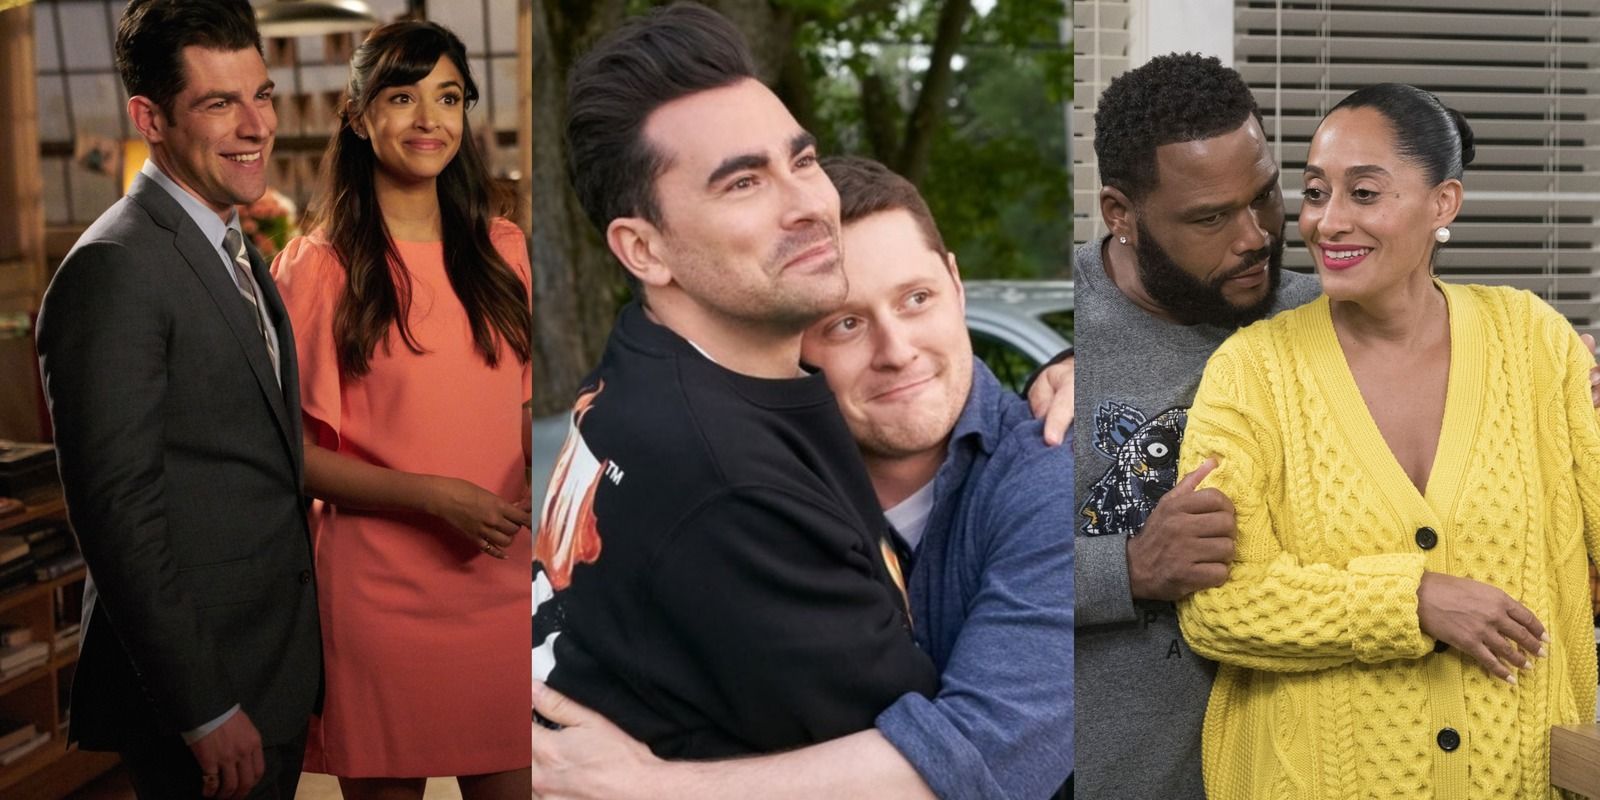 David And Patrick & 9 Other Sitcom Couples That Are Totally Underrated